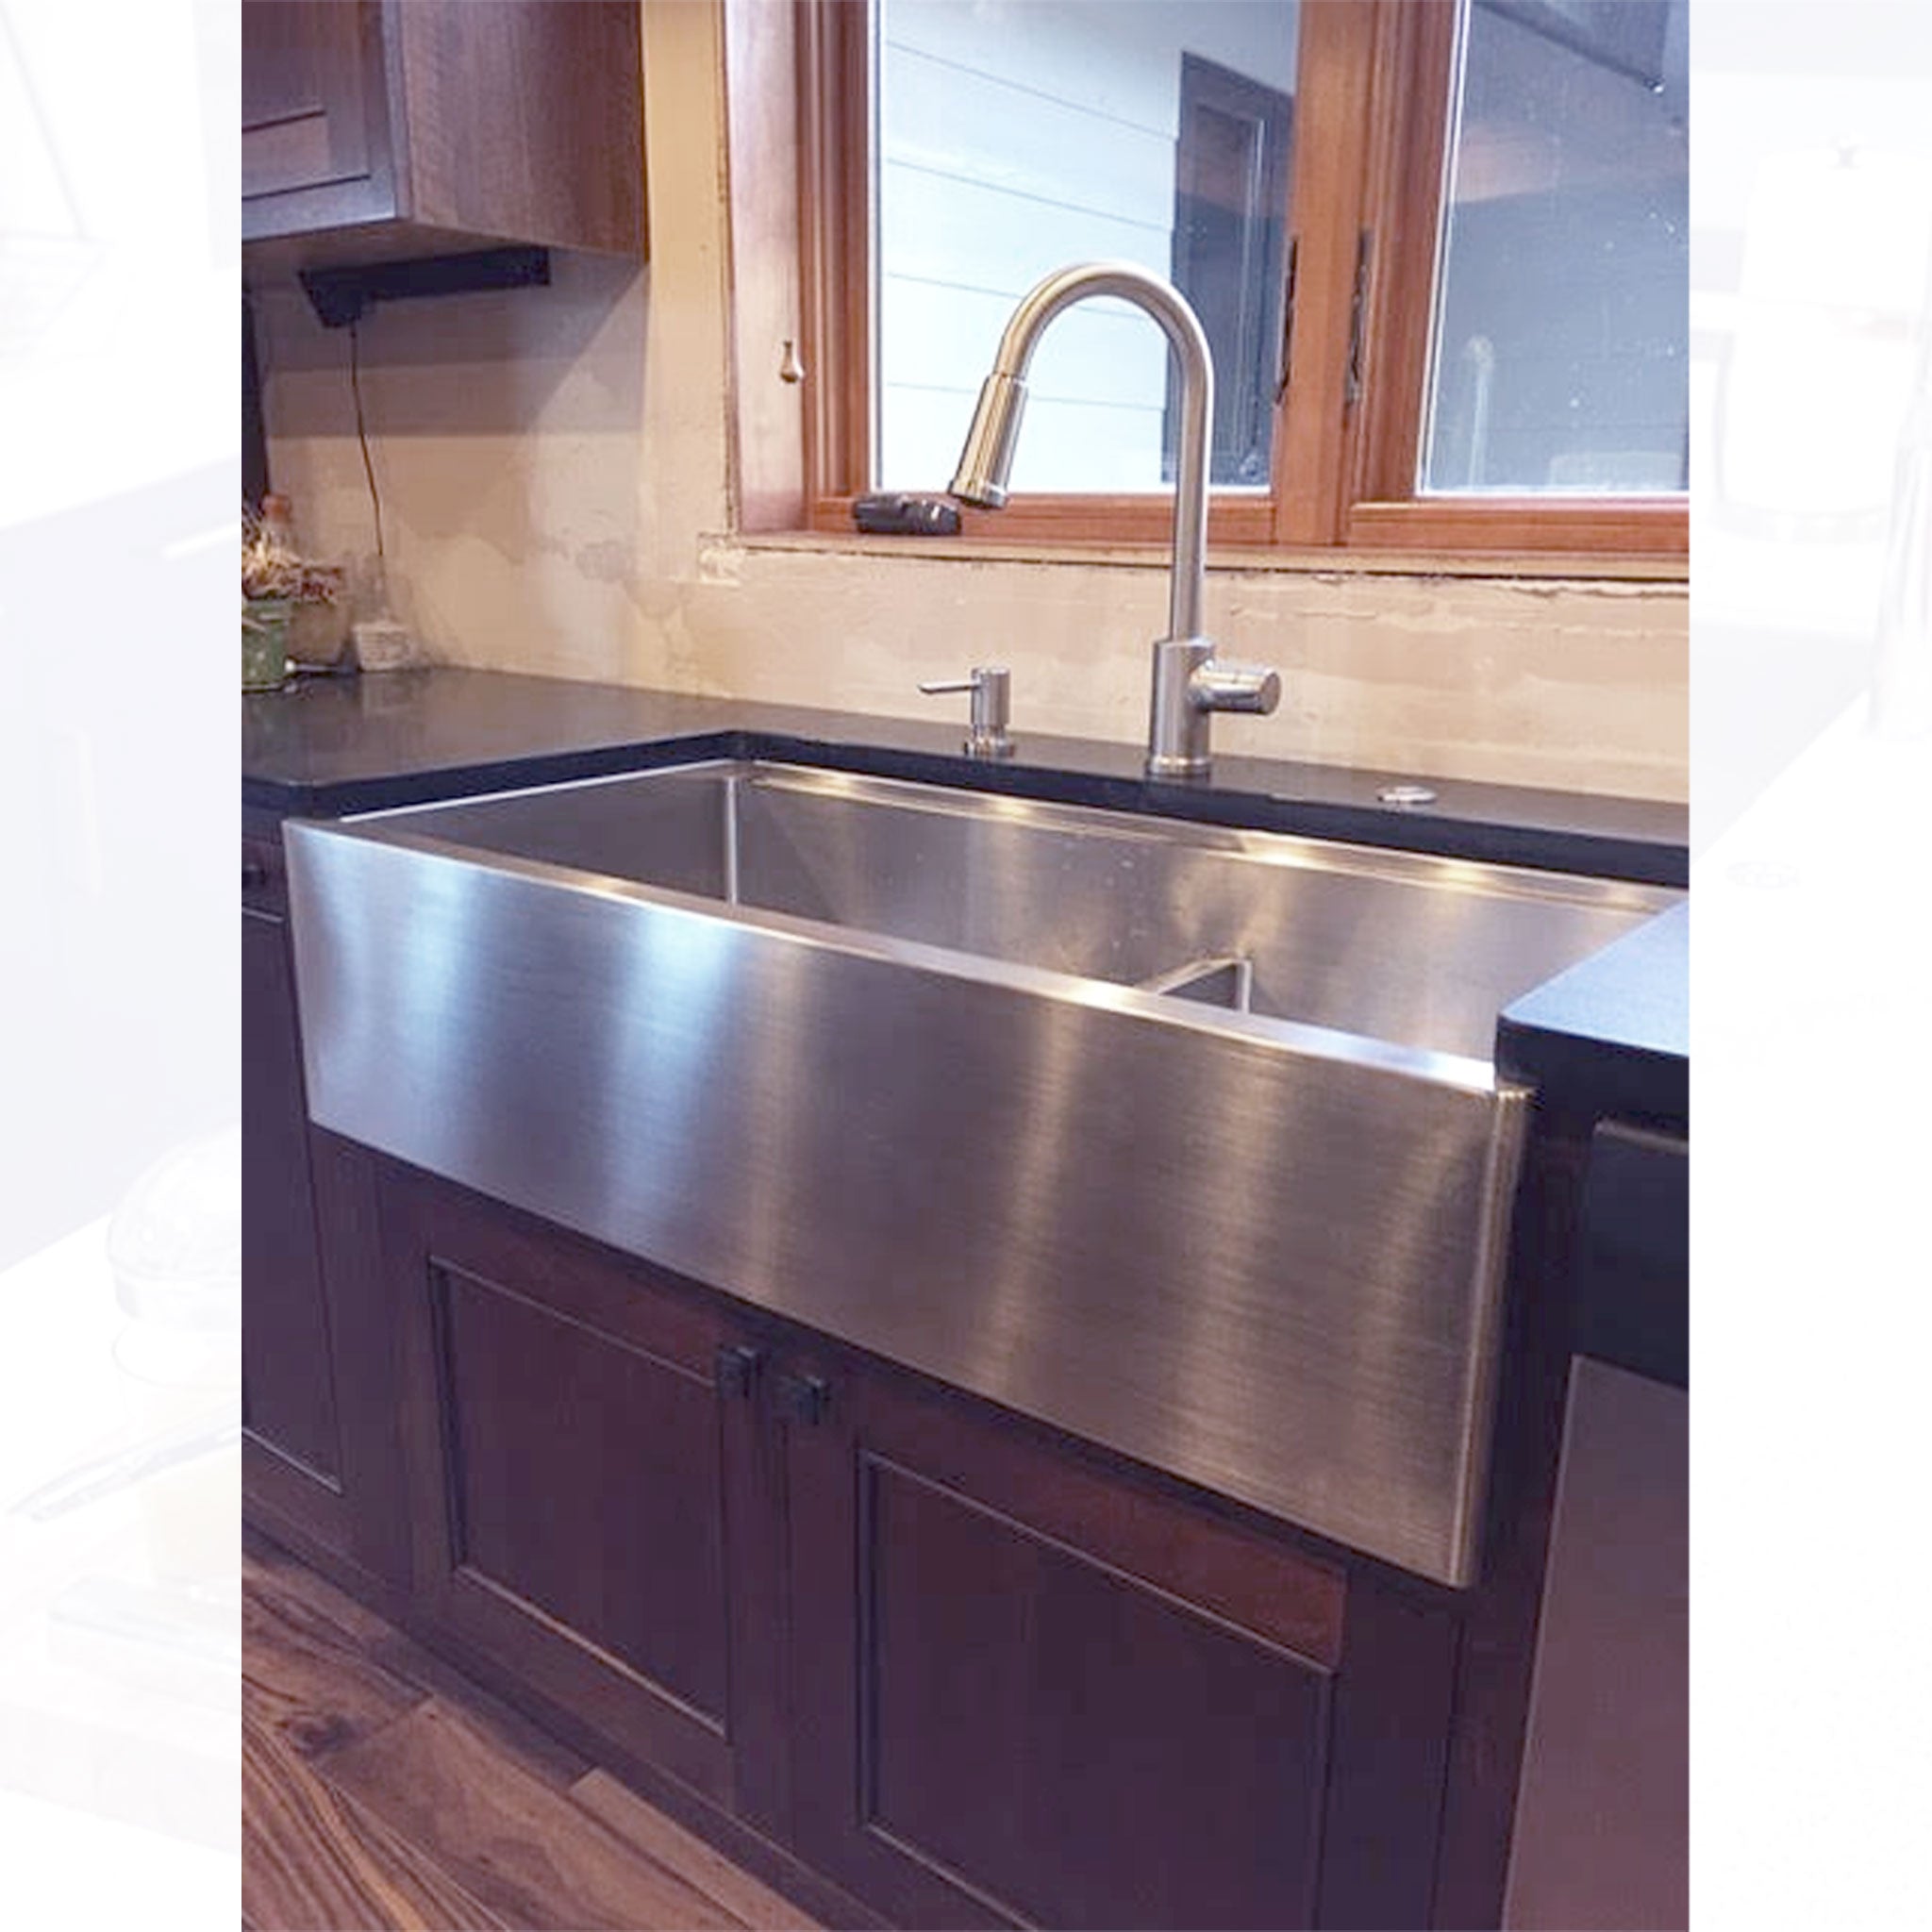 Frontside view of Create Good Sink's 304 Stainless Steel Farmhouse Kitchen Sink